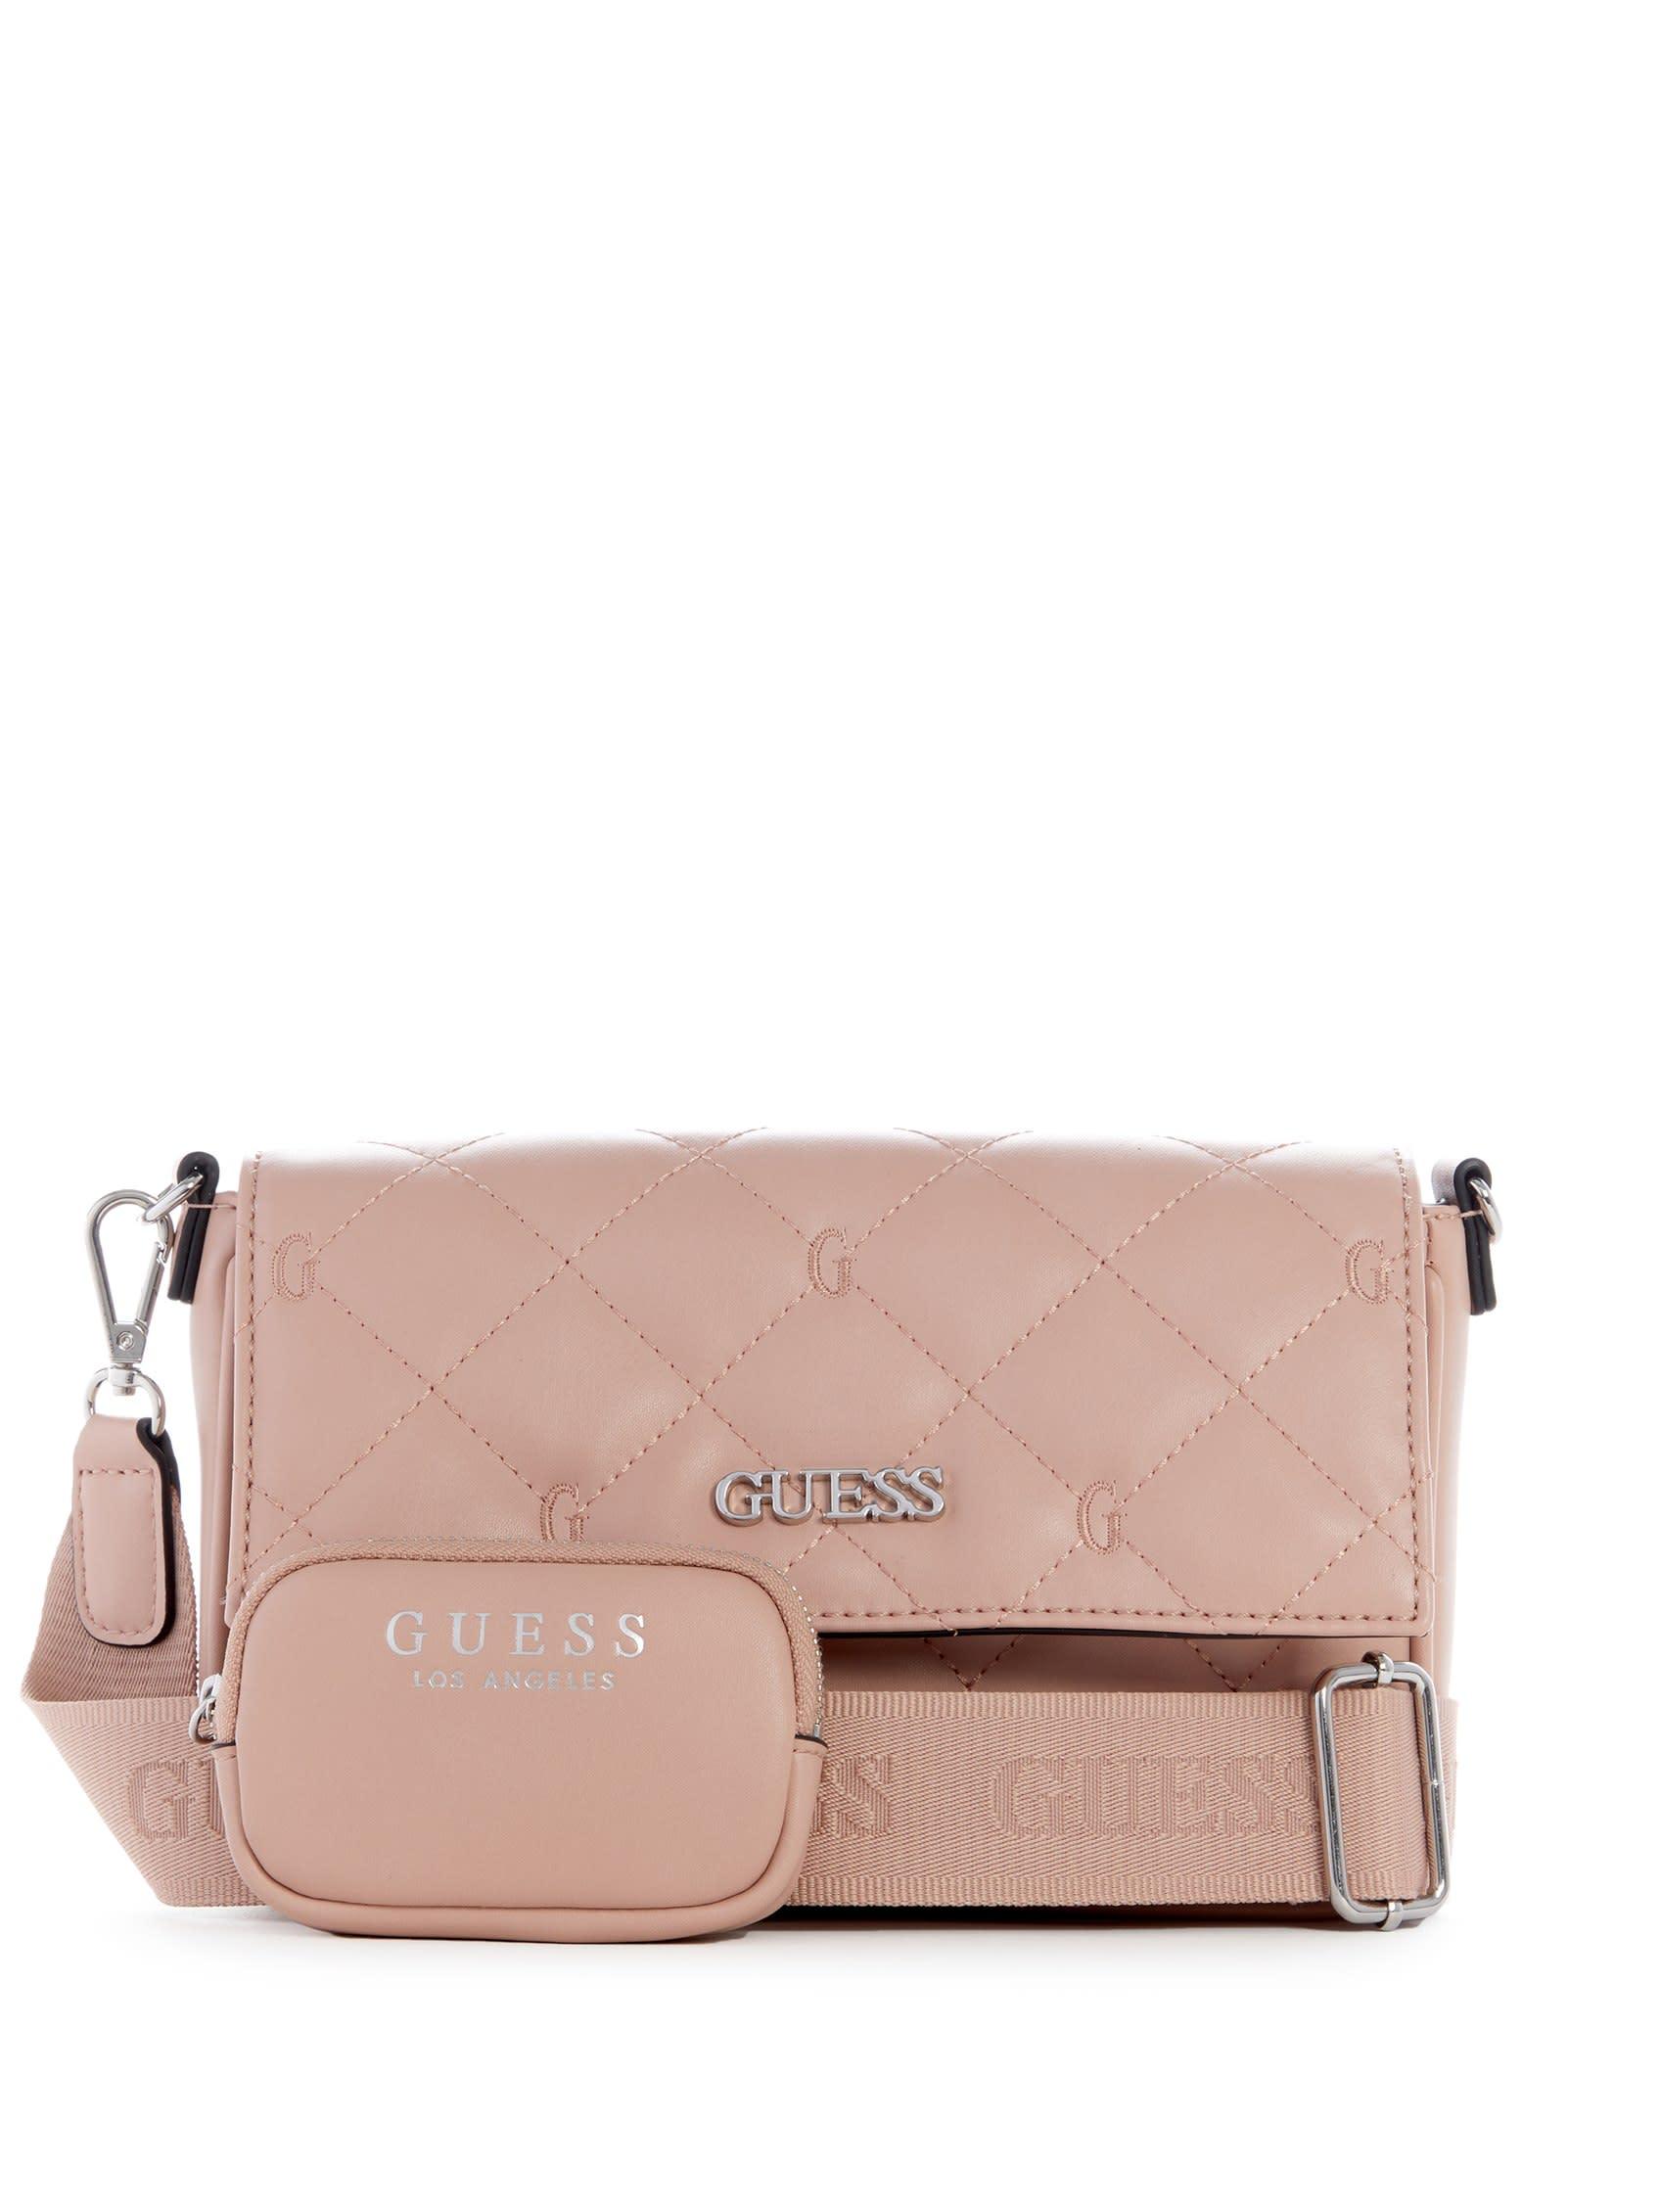 Guess Factory Markham Crossbody Fold Bag in Pink